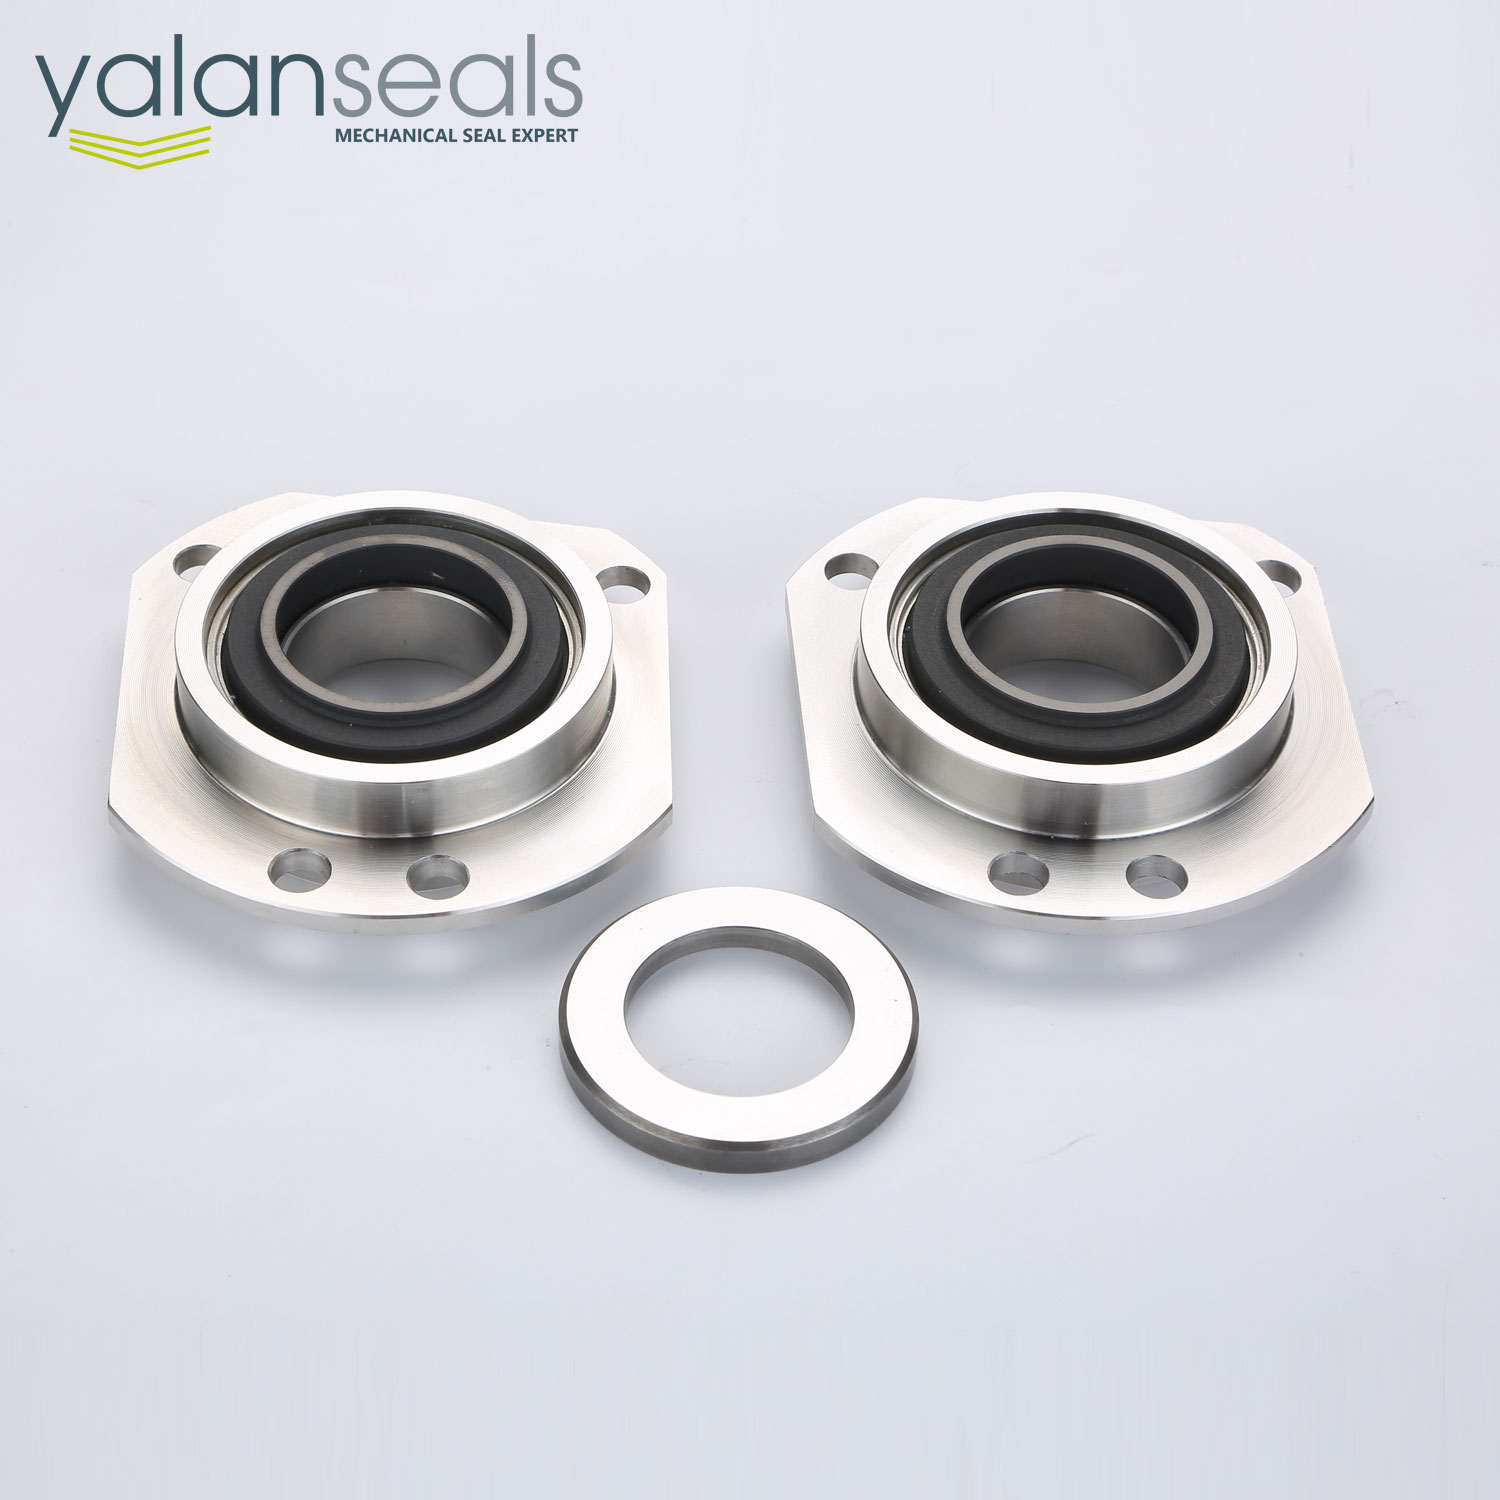 YALAN 60A-51C-60B Double Seal for High Speed Pumps